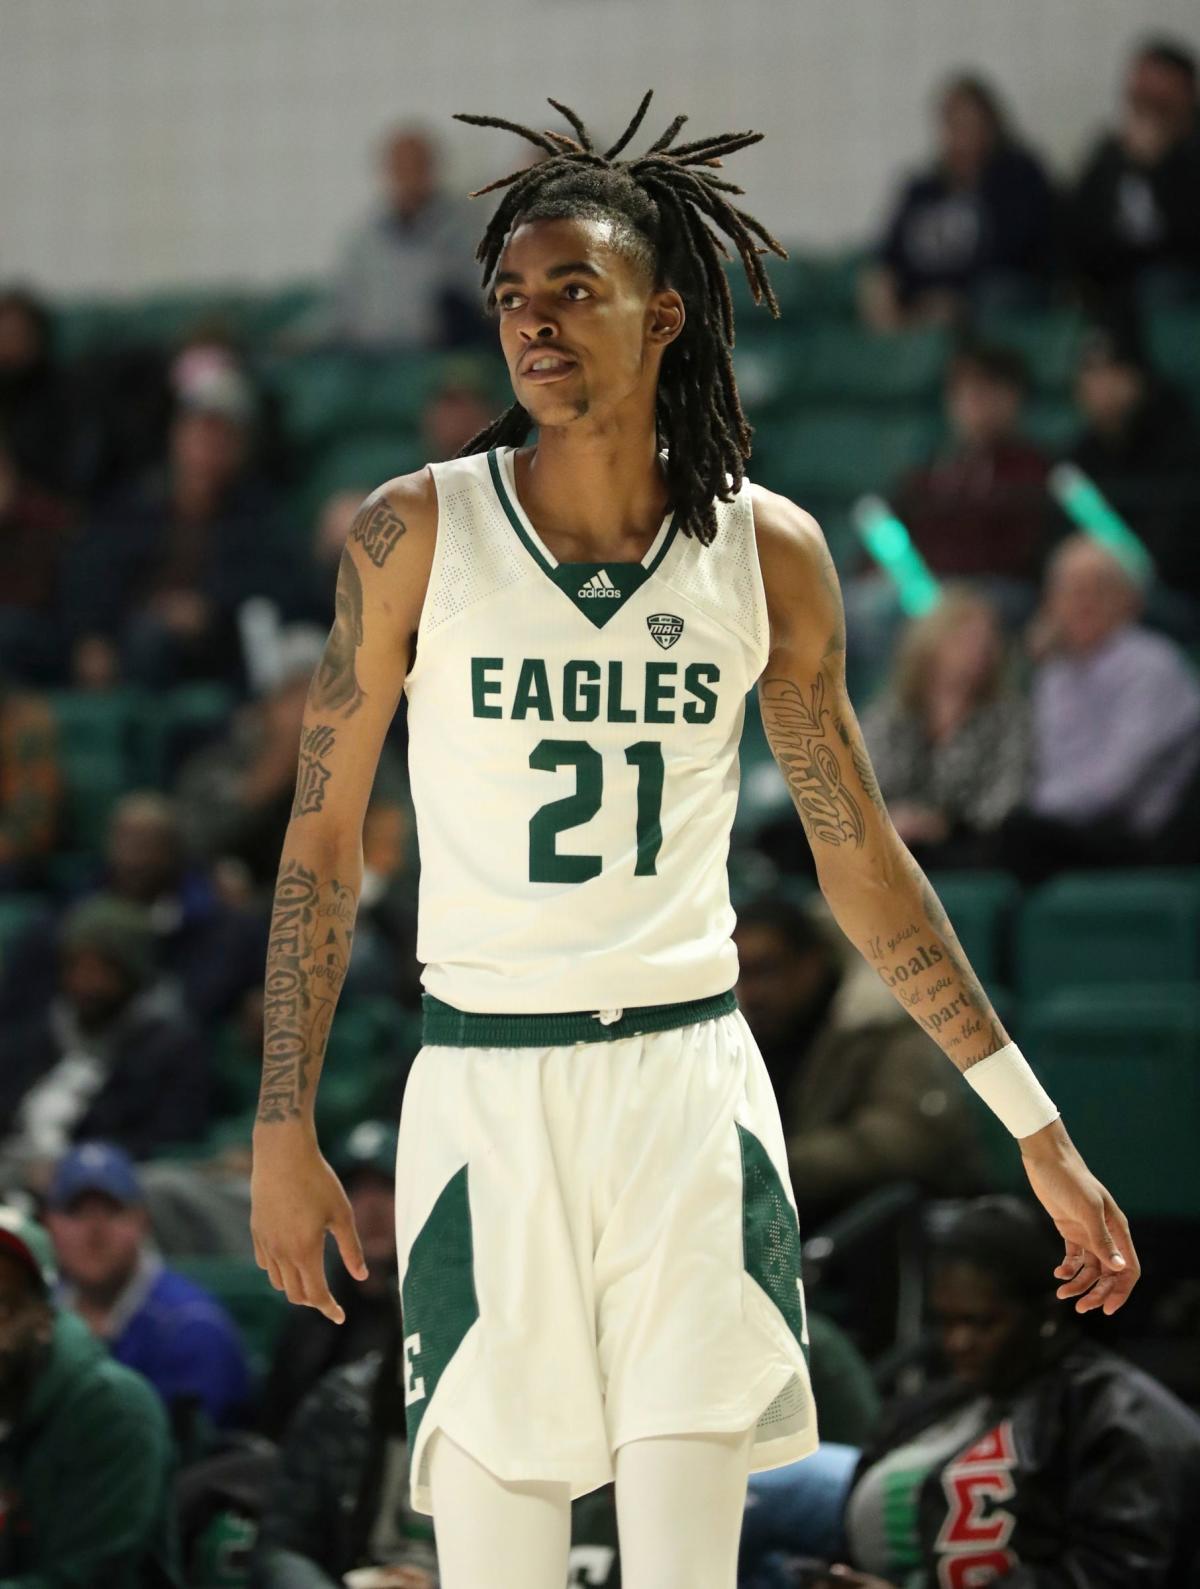 Eastern Michigan's Emoni Bates drafted by Cavaliers at No. 49 overall